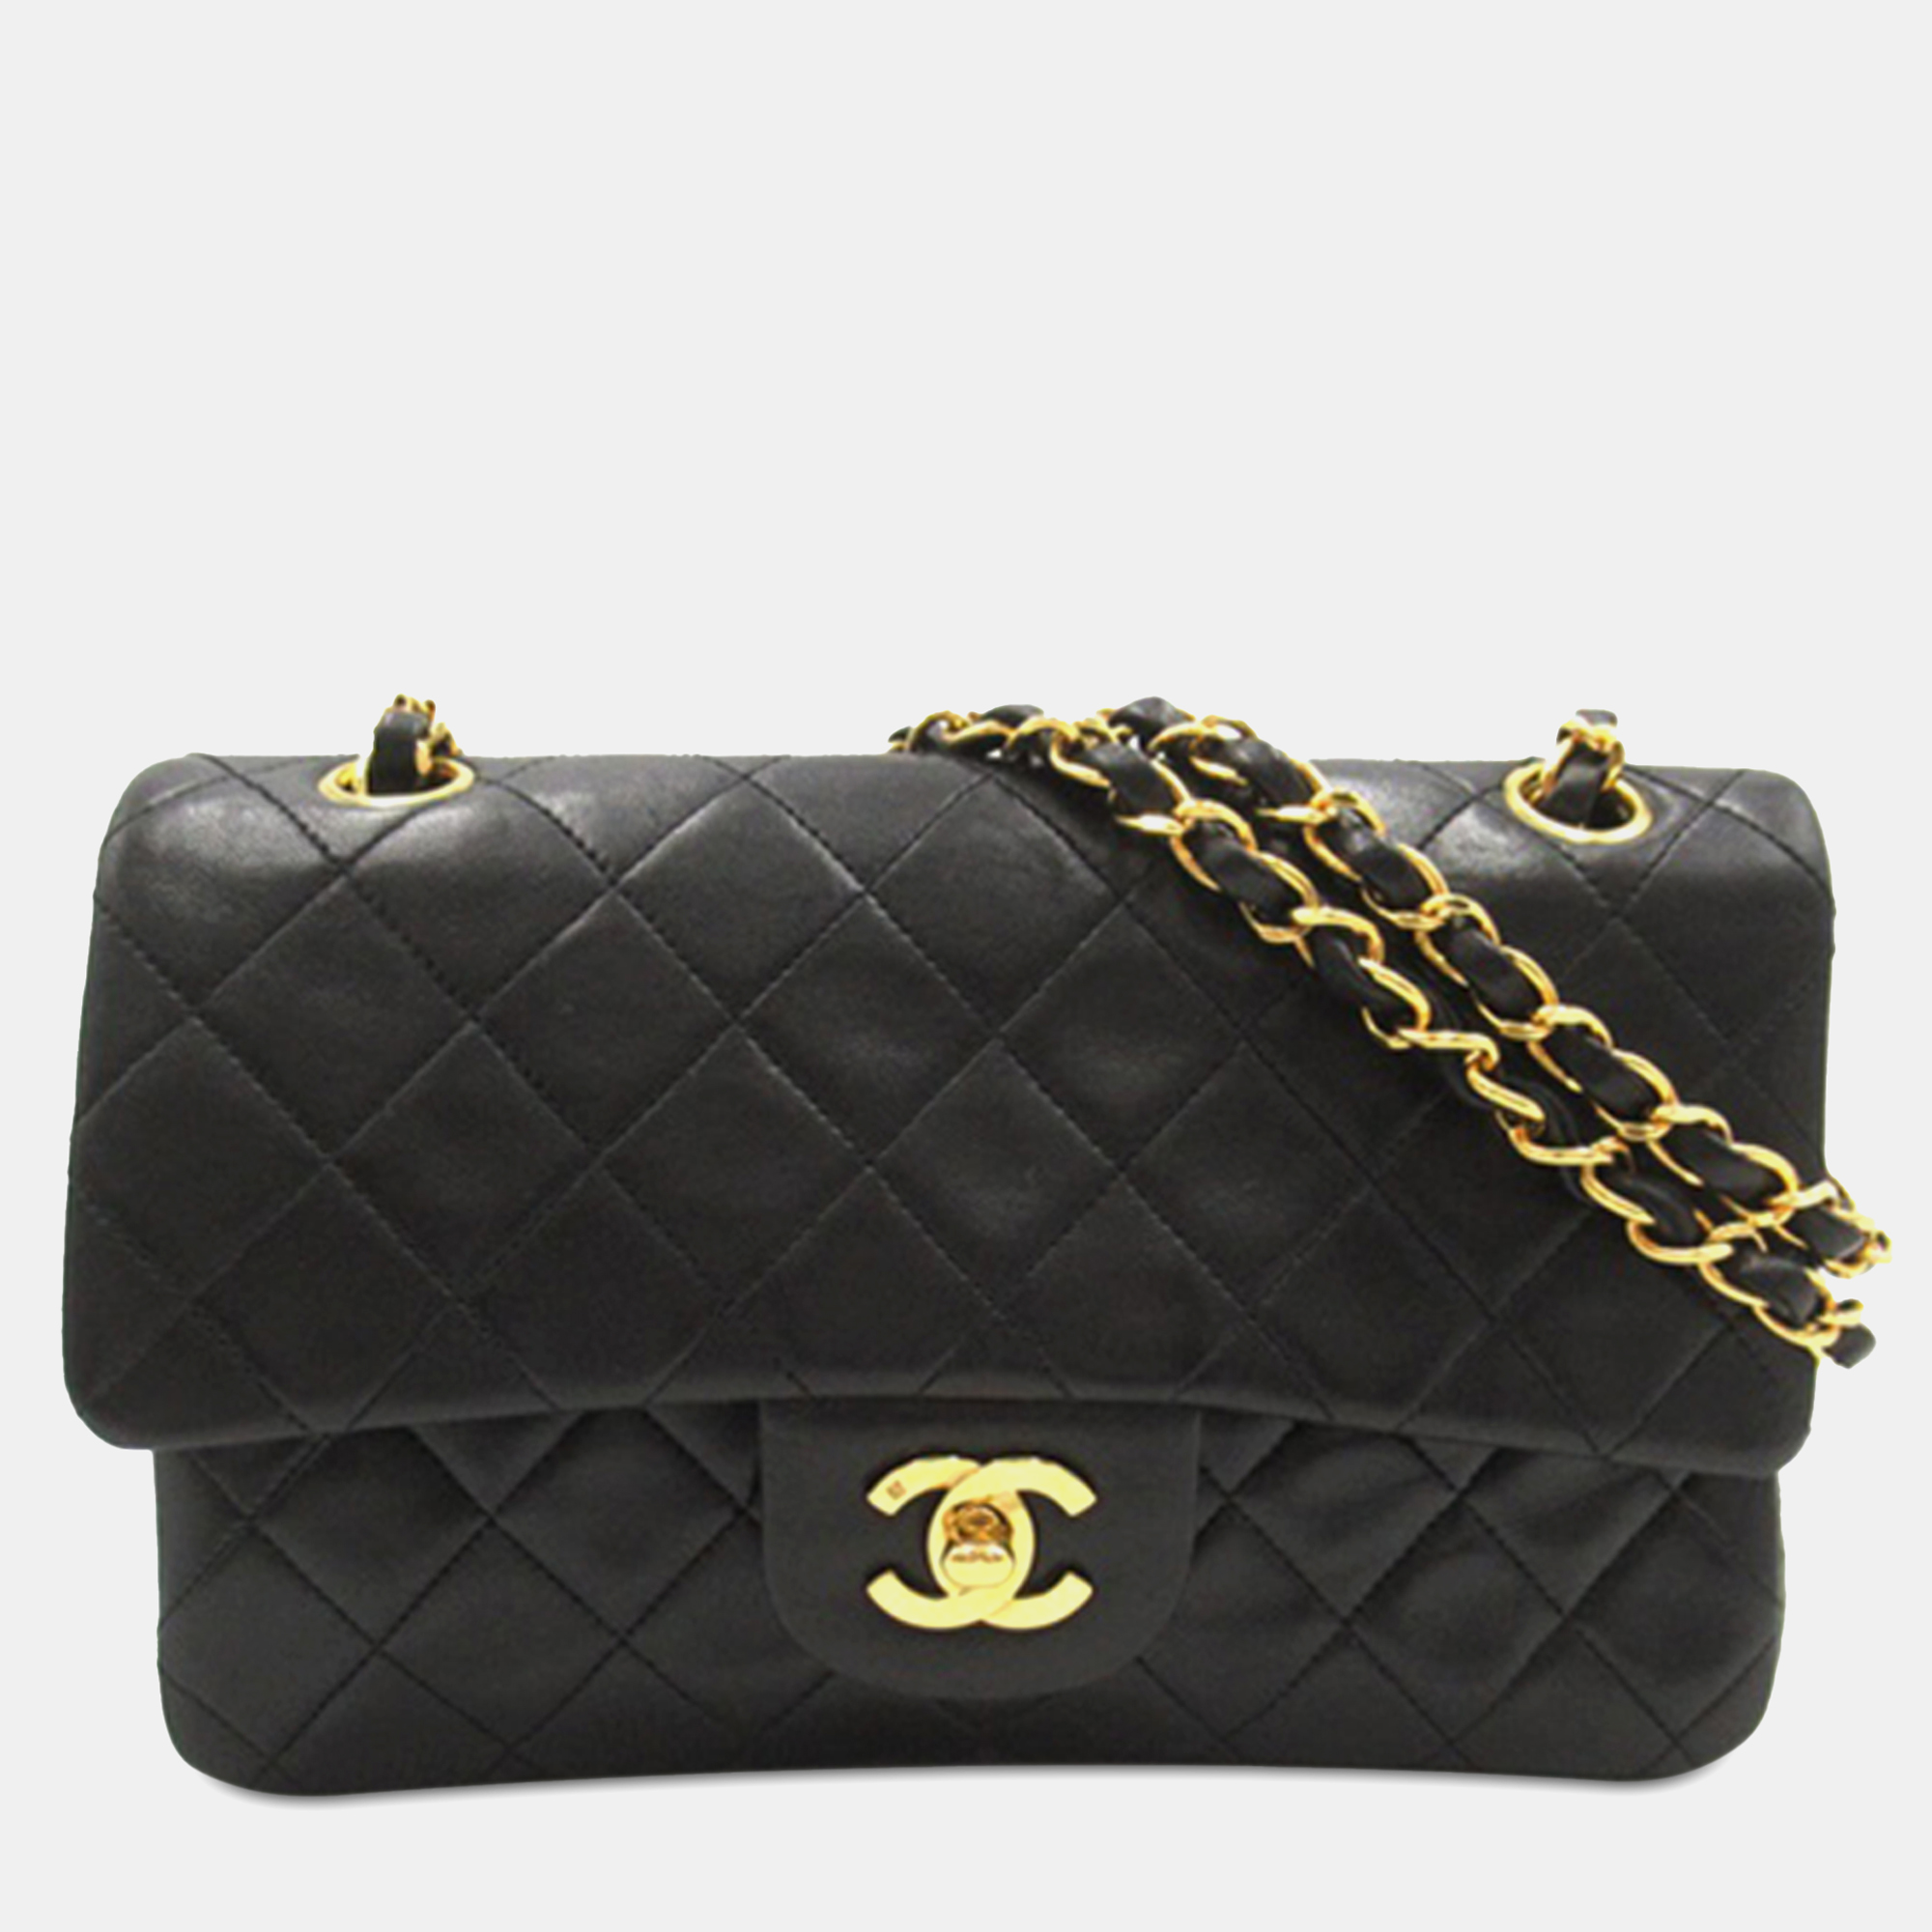 Chanel small classic lambskin double flap